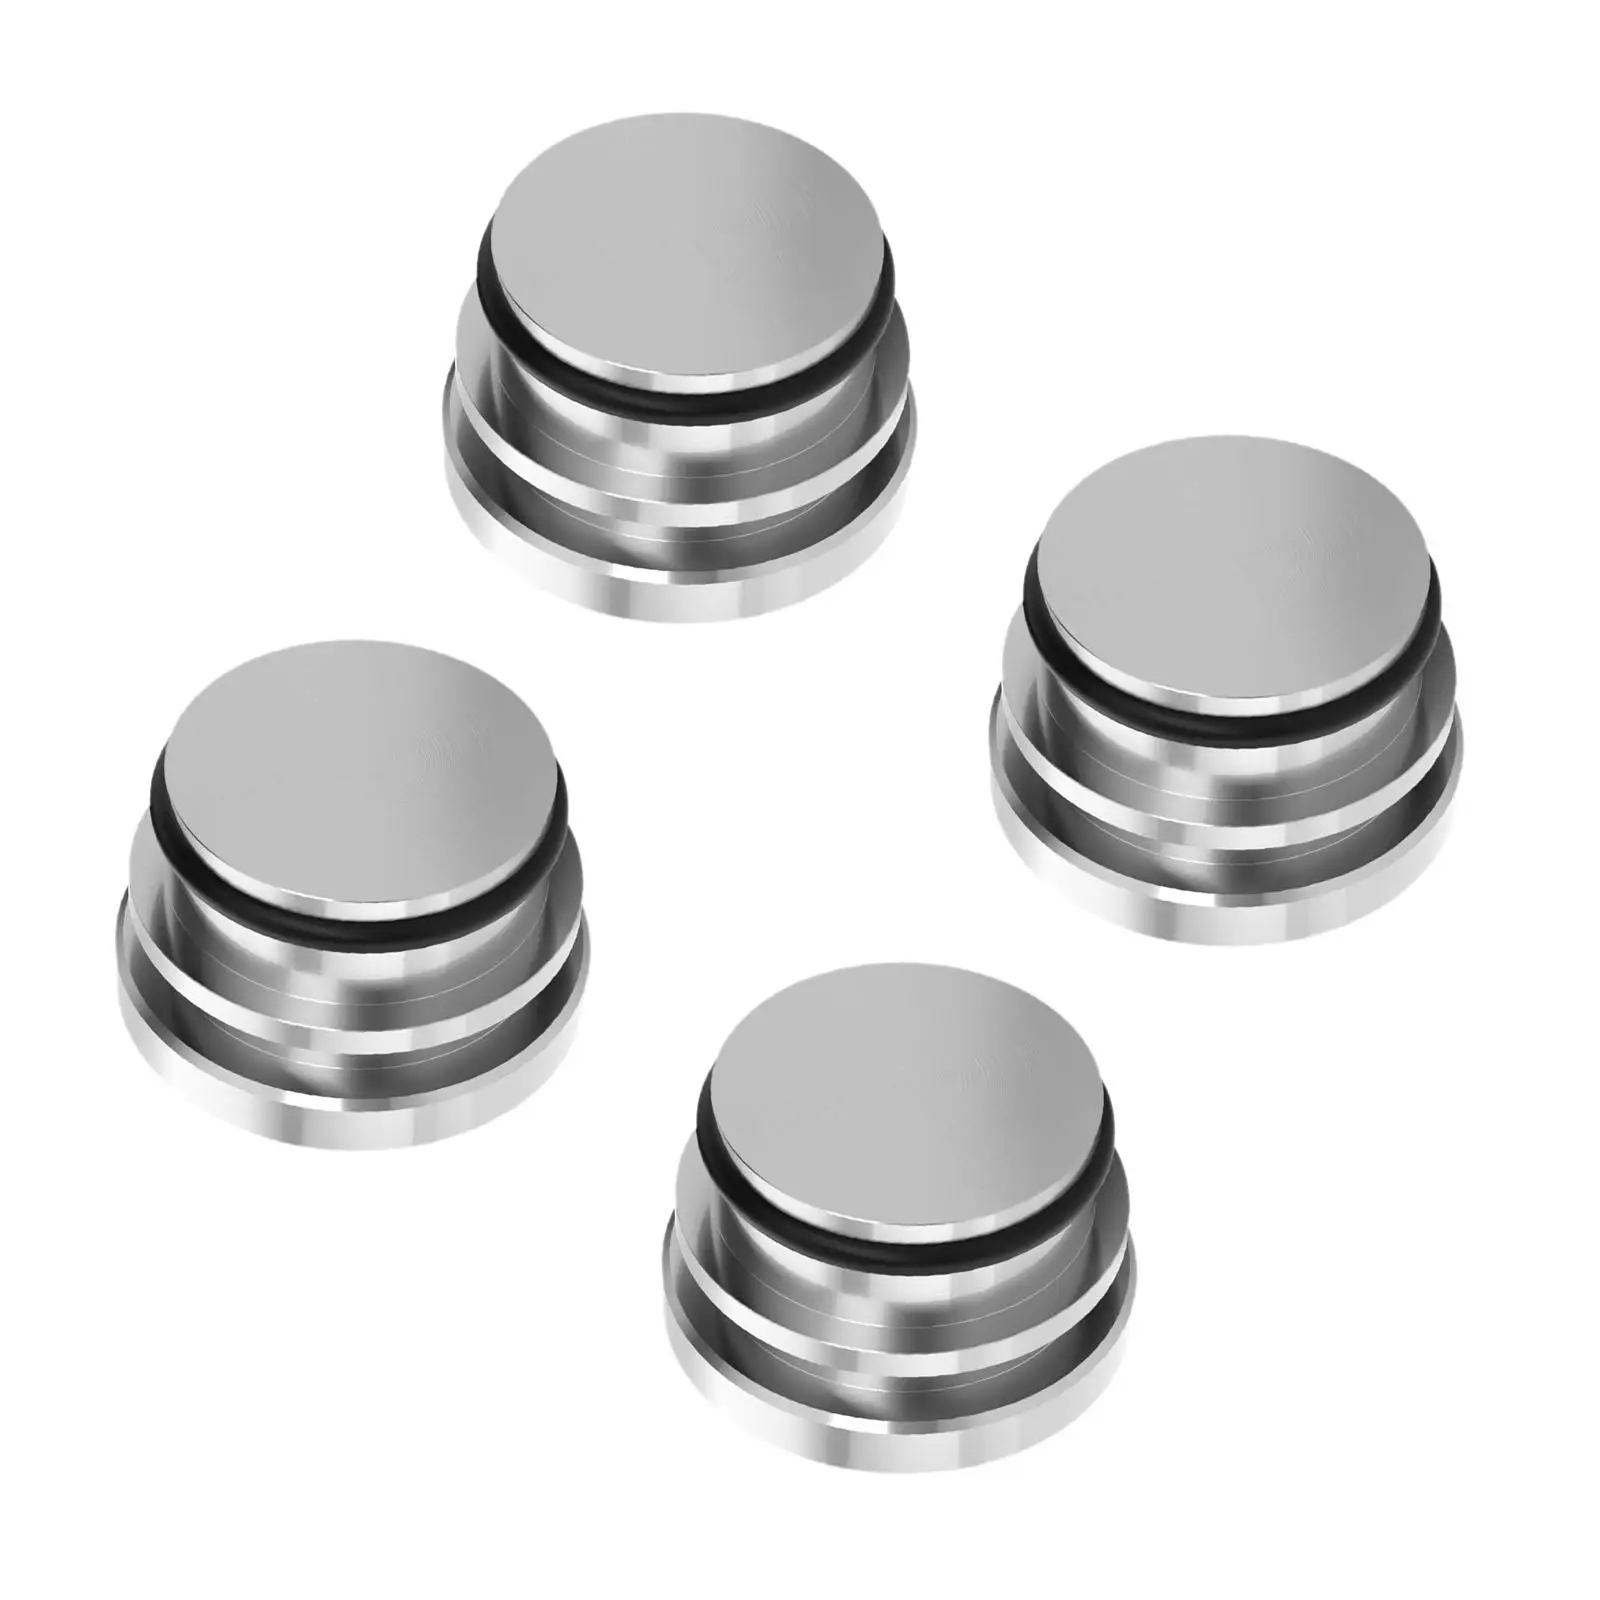 4x 12V Cigarette Lighter Plug Cover Universal Easy to Install Quality Metal Replacement Dust Cover Lighter Socket Cover